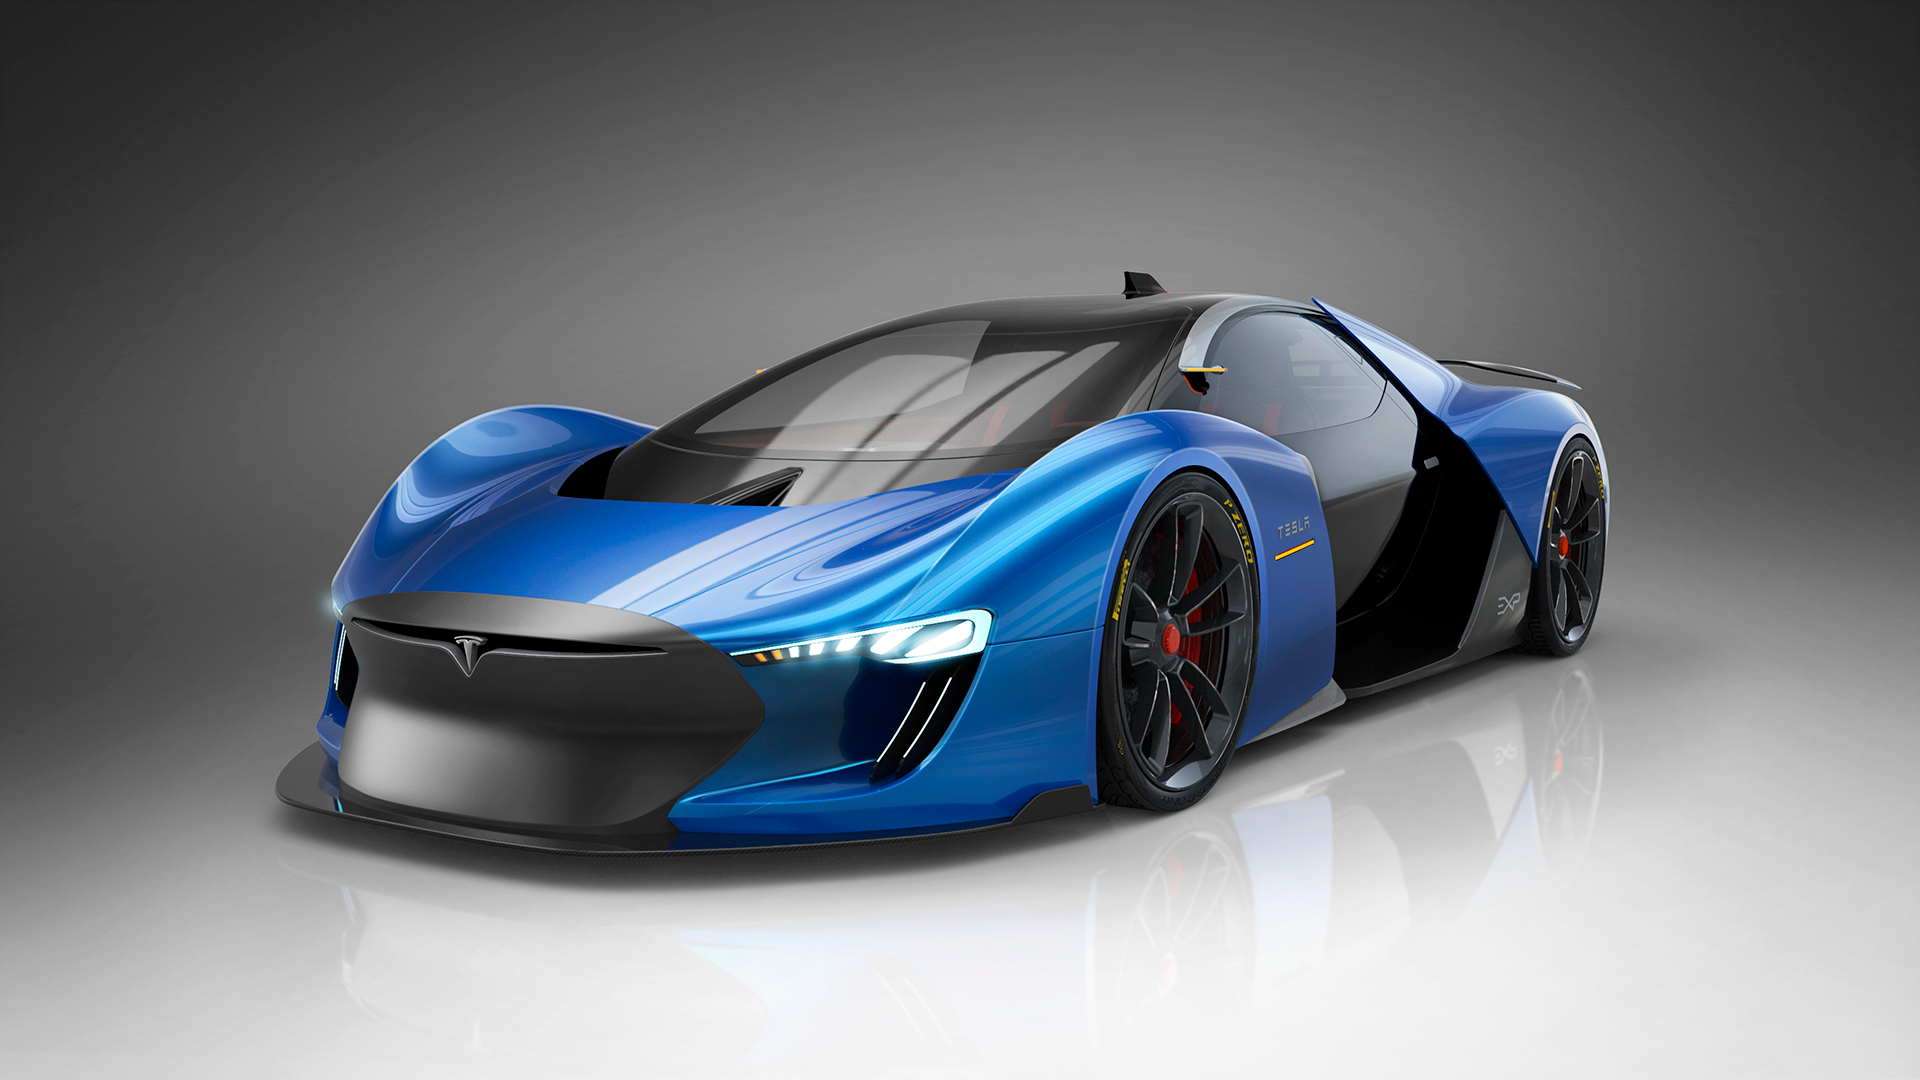 Designer's vision of an Electric Supercar the 'Tesla Model EXP' X Auto